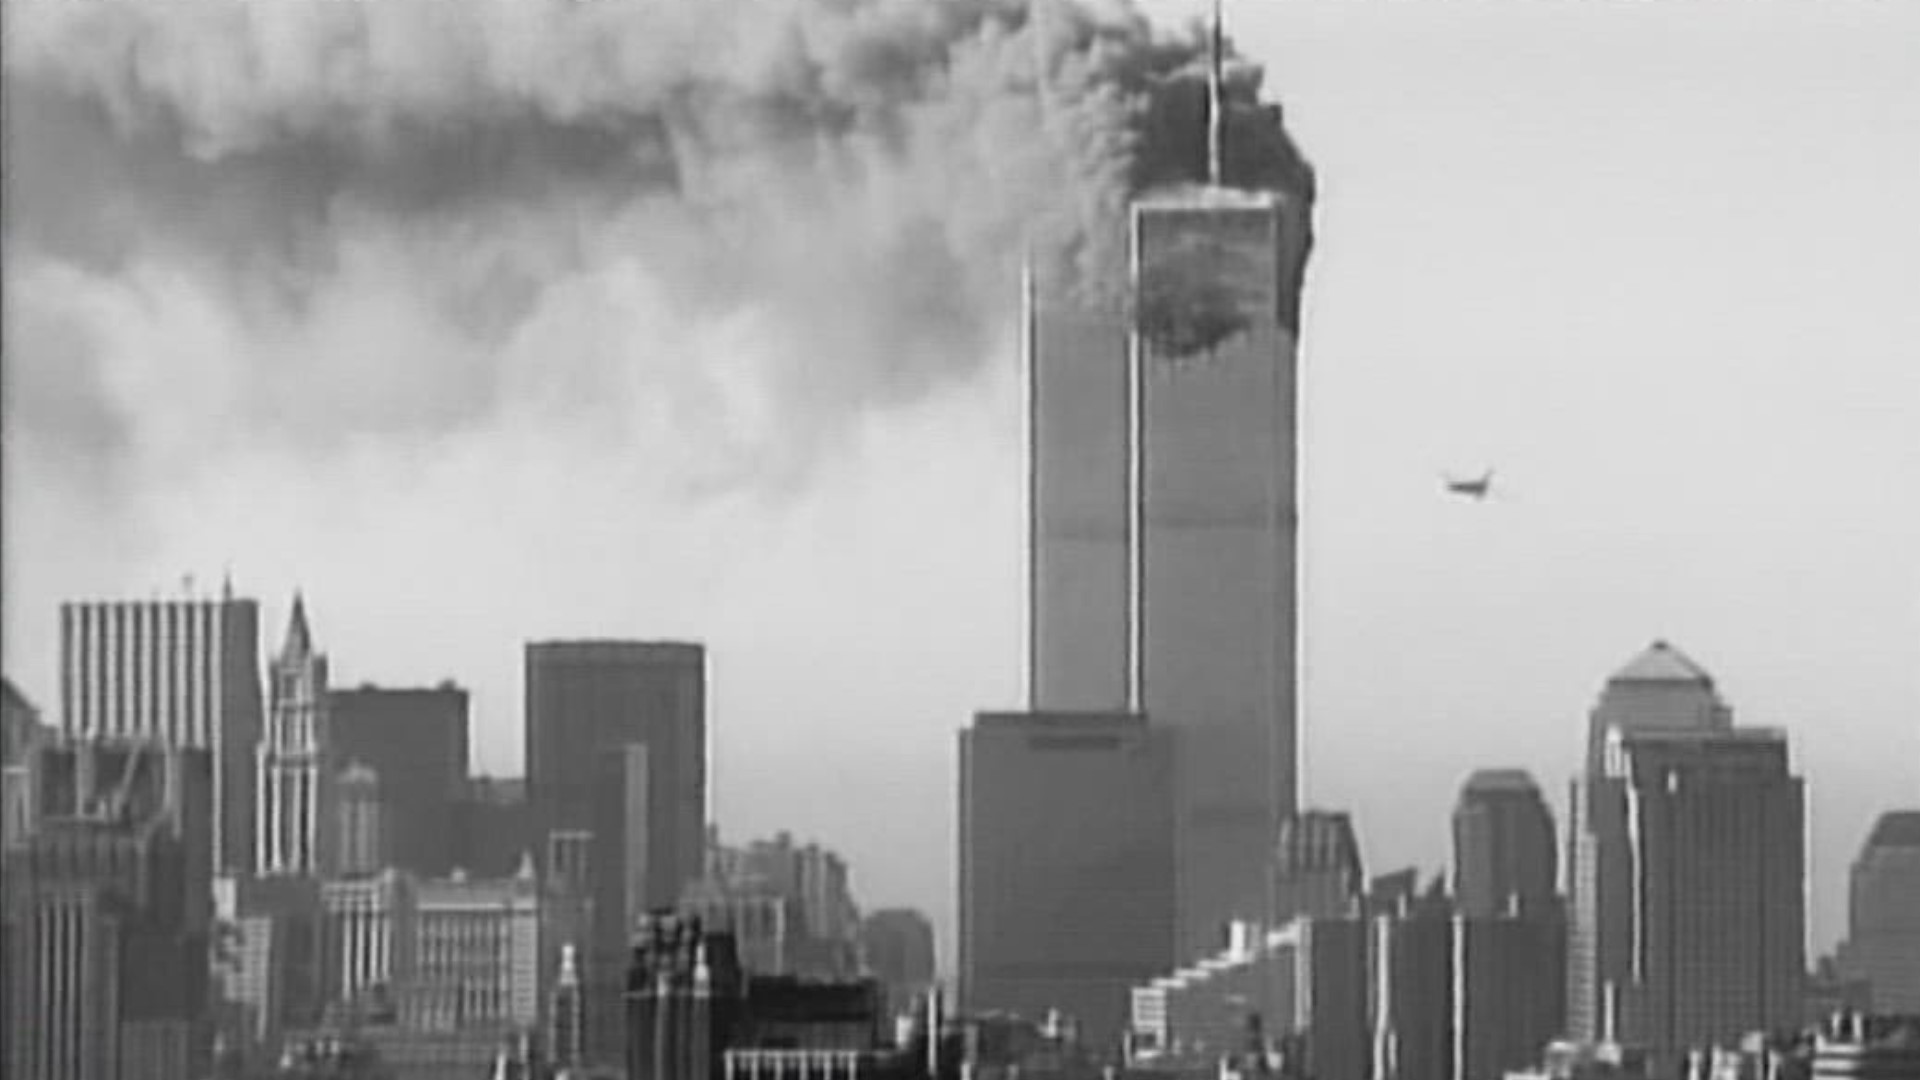 The 208 looks back on how 9/11 changed the world and impacted Idaho twenty years ago.